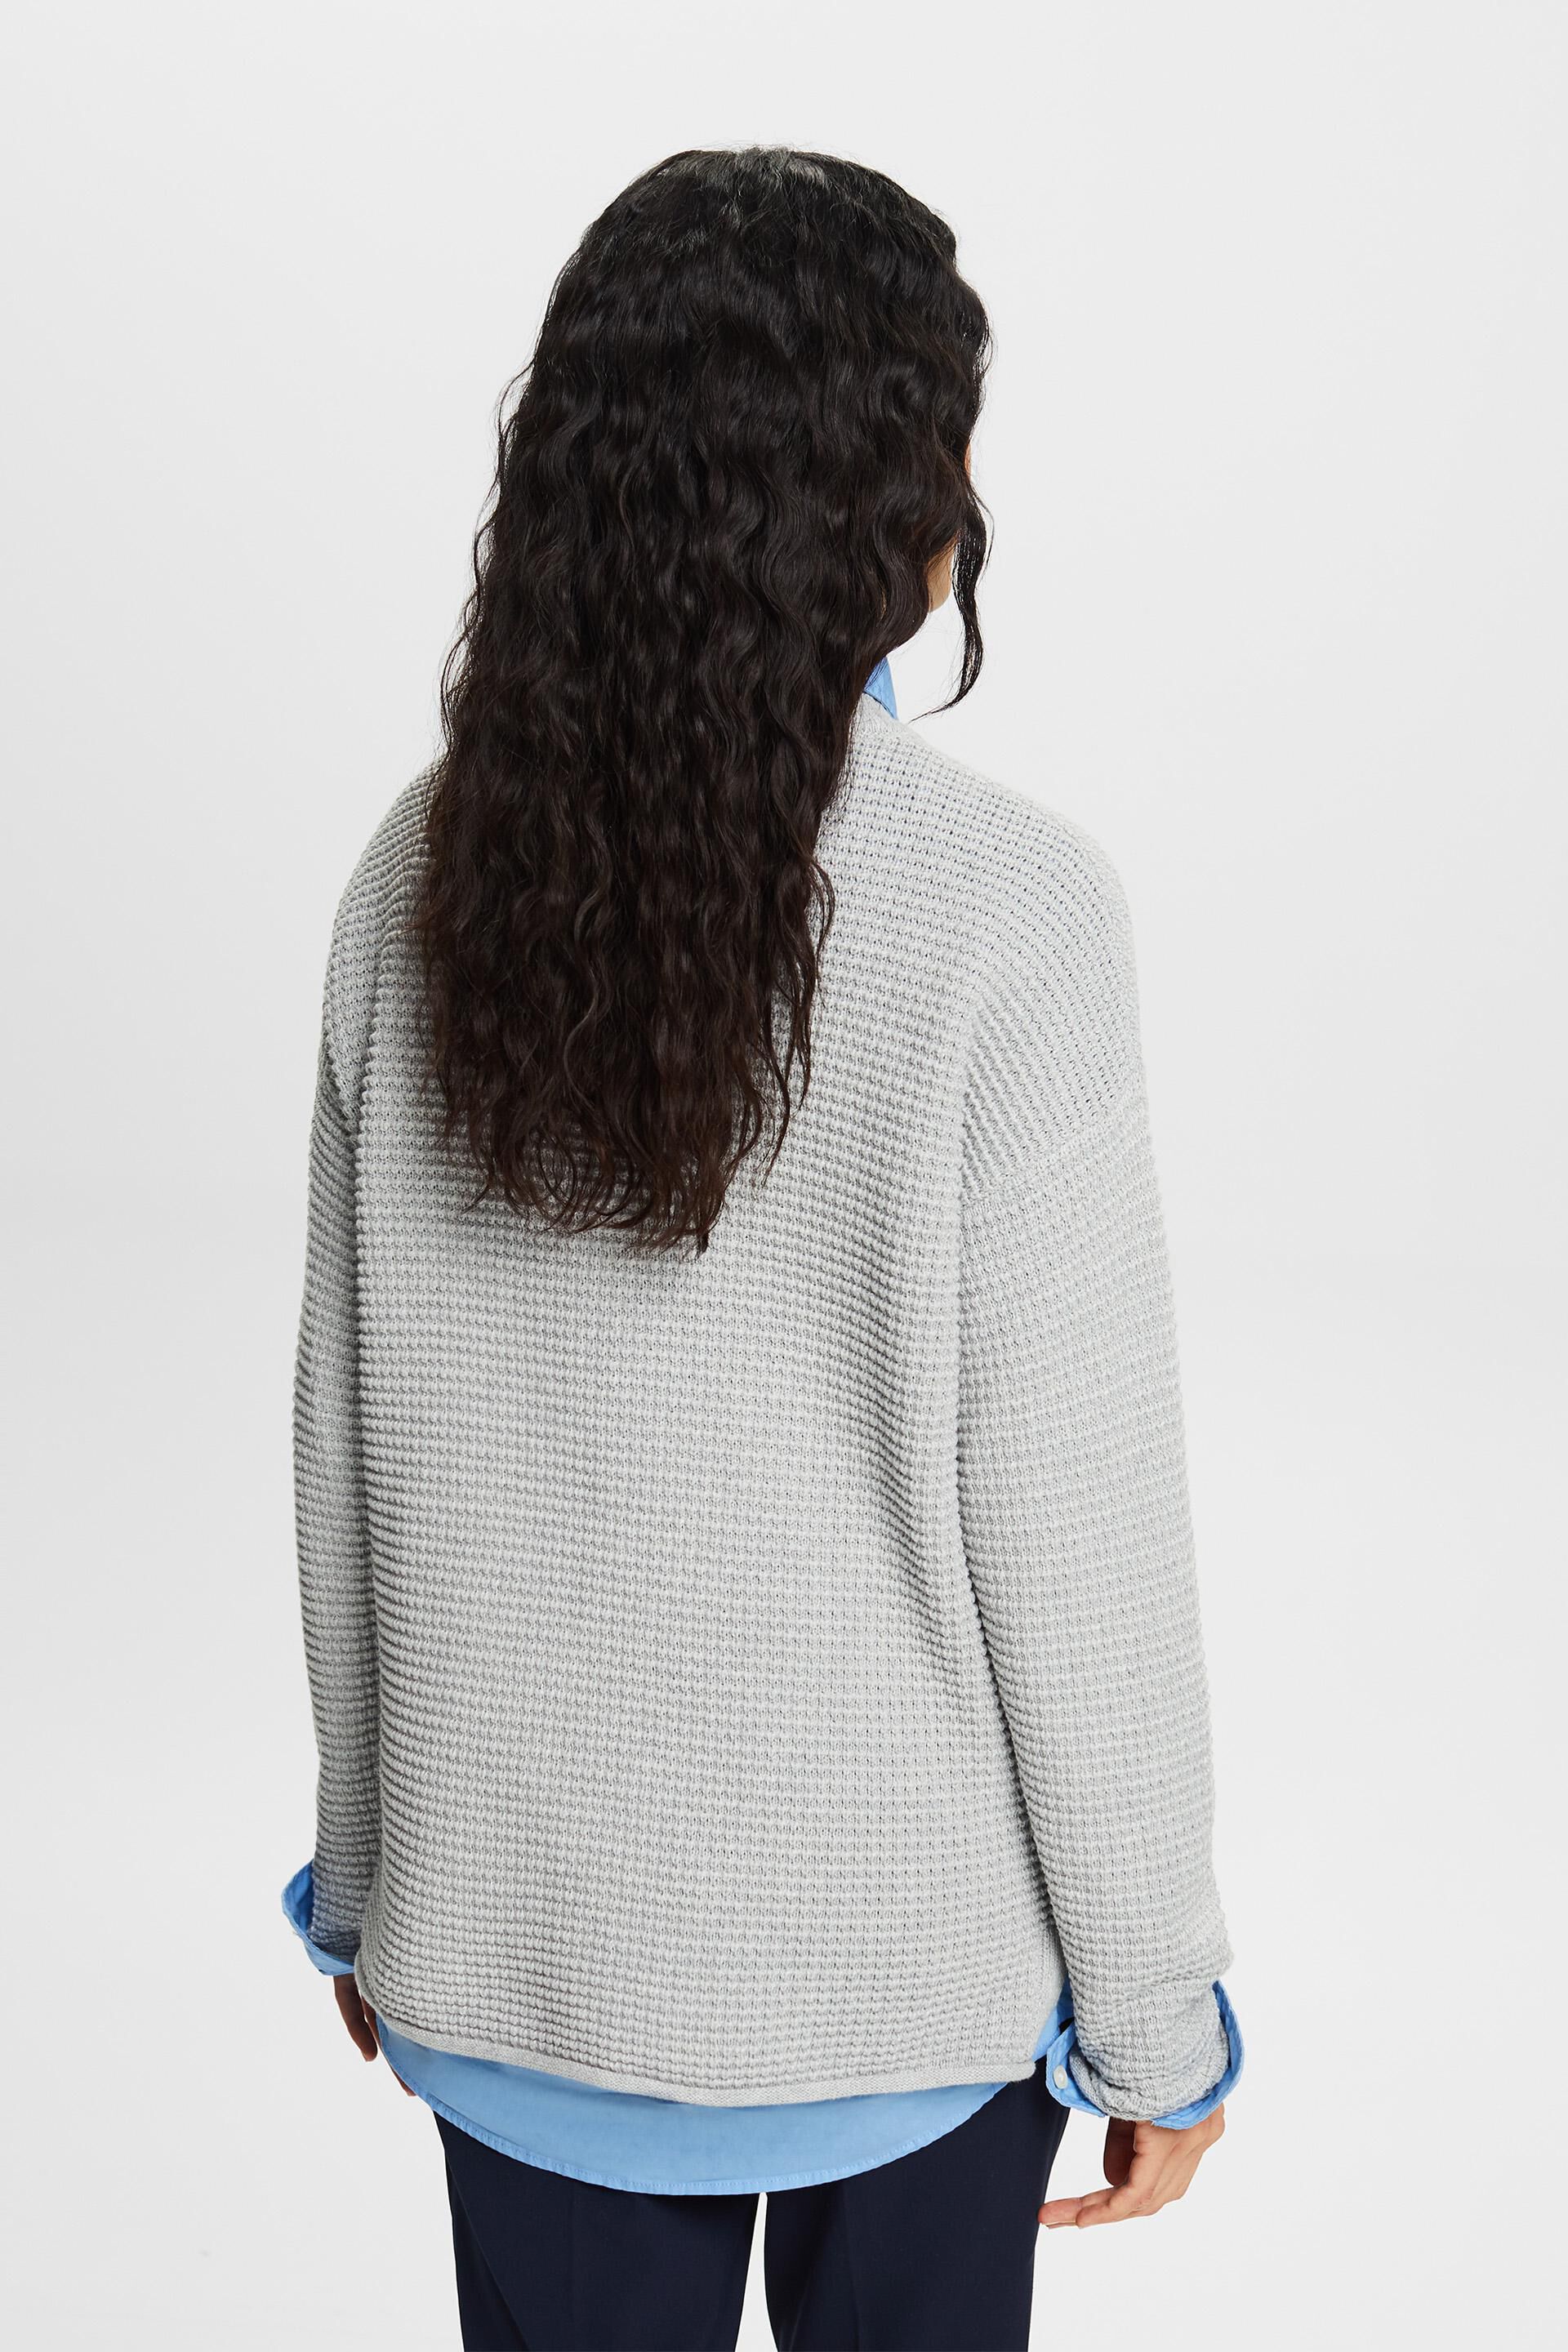 ESPRIT - Textured Knit Sweater at our online shop